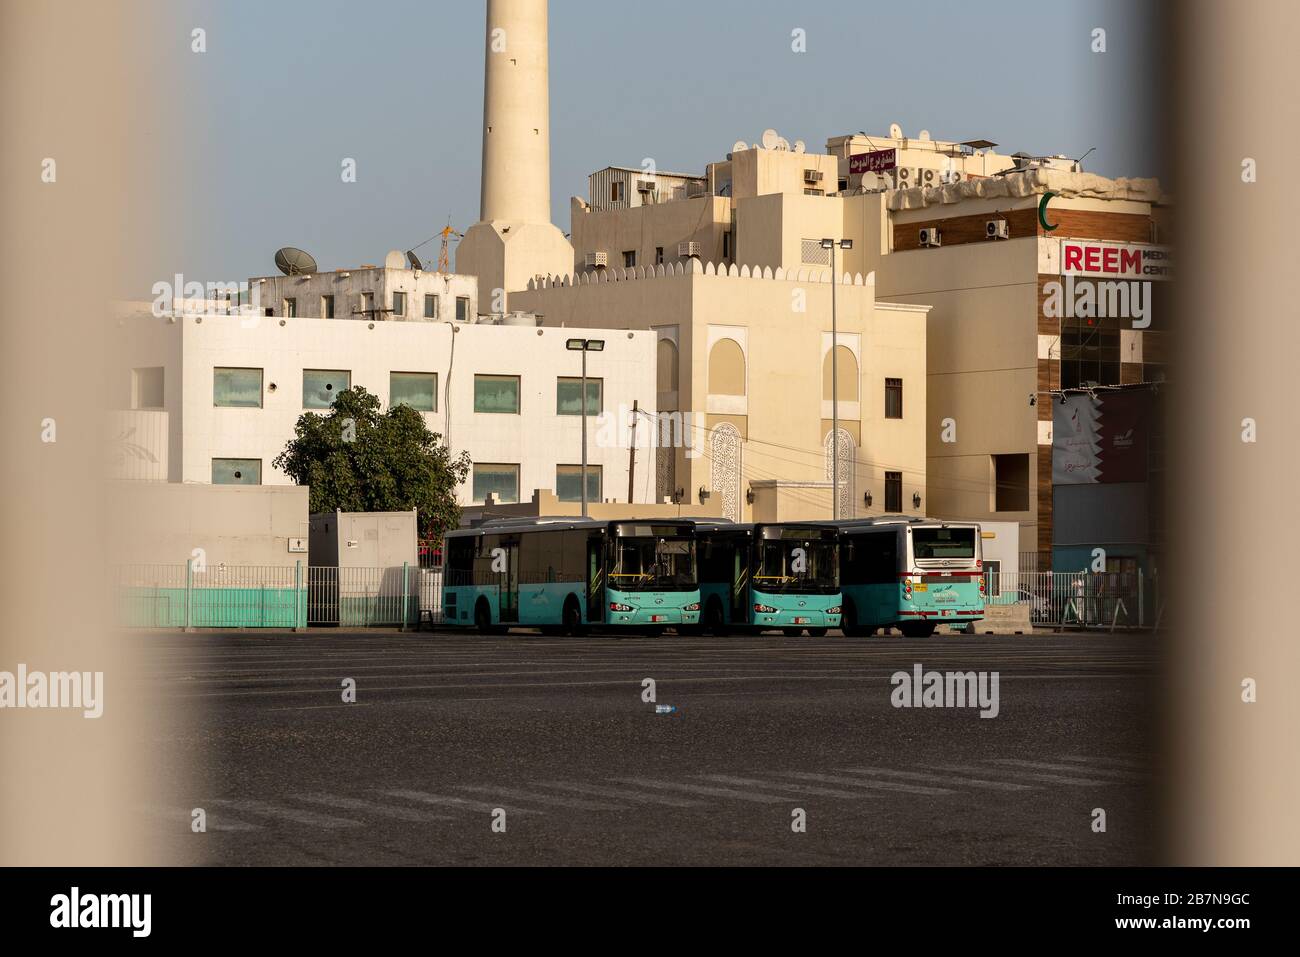 A closed public bus terminal in the heart of Doha. Qatar has implemented a series of measures aimed at containing the outbreak of the novel coronavirus in the country. Measures include closing of schools and universities, a temporary ban on inbound flights and banning dinning at restaurants and cafes. An economic and financial package will provide incentives amounting to 75 billion Qatari riyals ($23bn) to help support the private business sector during the outbreak. Stock Photo